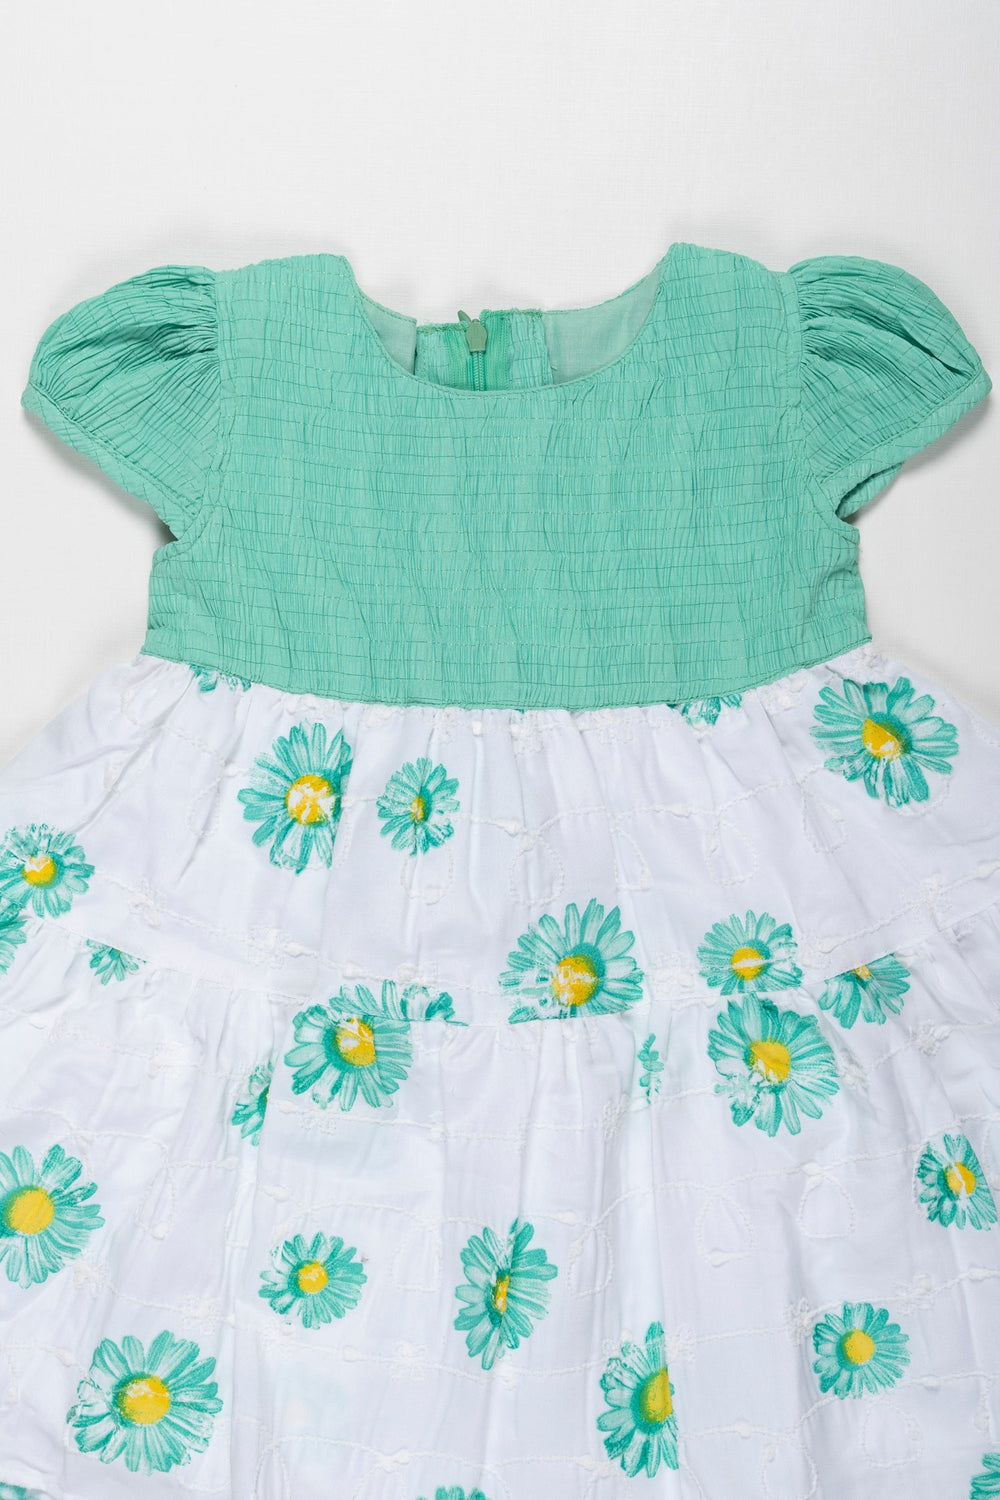 The Nesavu Girls Cotton Frock Springtime Blossom Girls Green Cotton Frock with Floral Accents Nesavu Girls Green Floral Print Cotton Frock | Perfect for Spring/Summer | The Nesavu